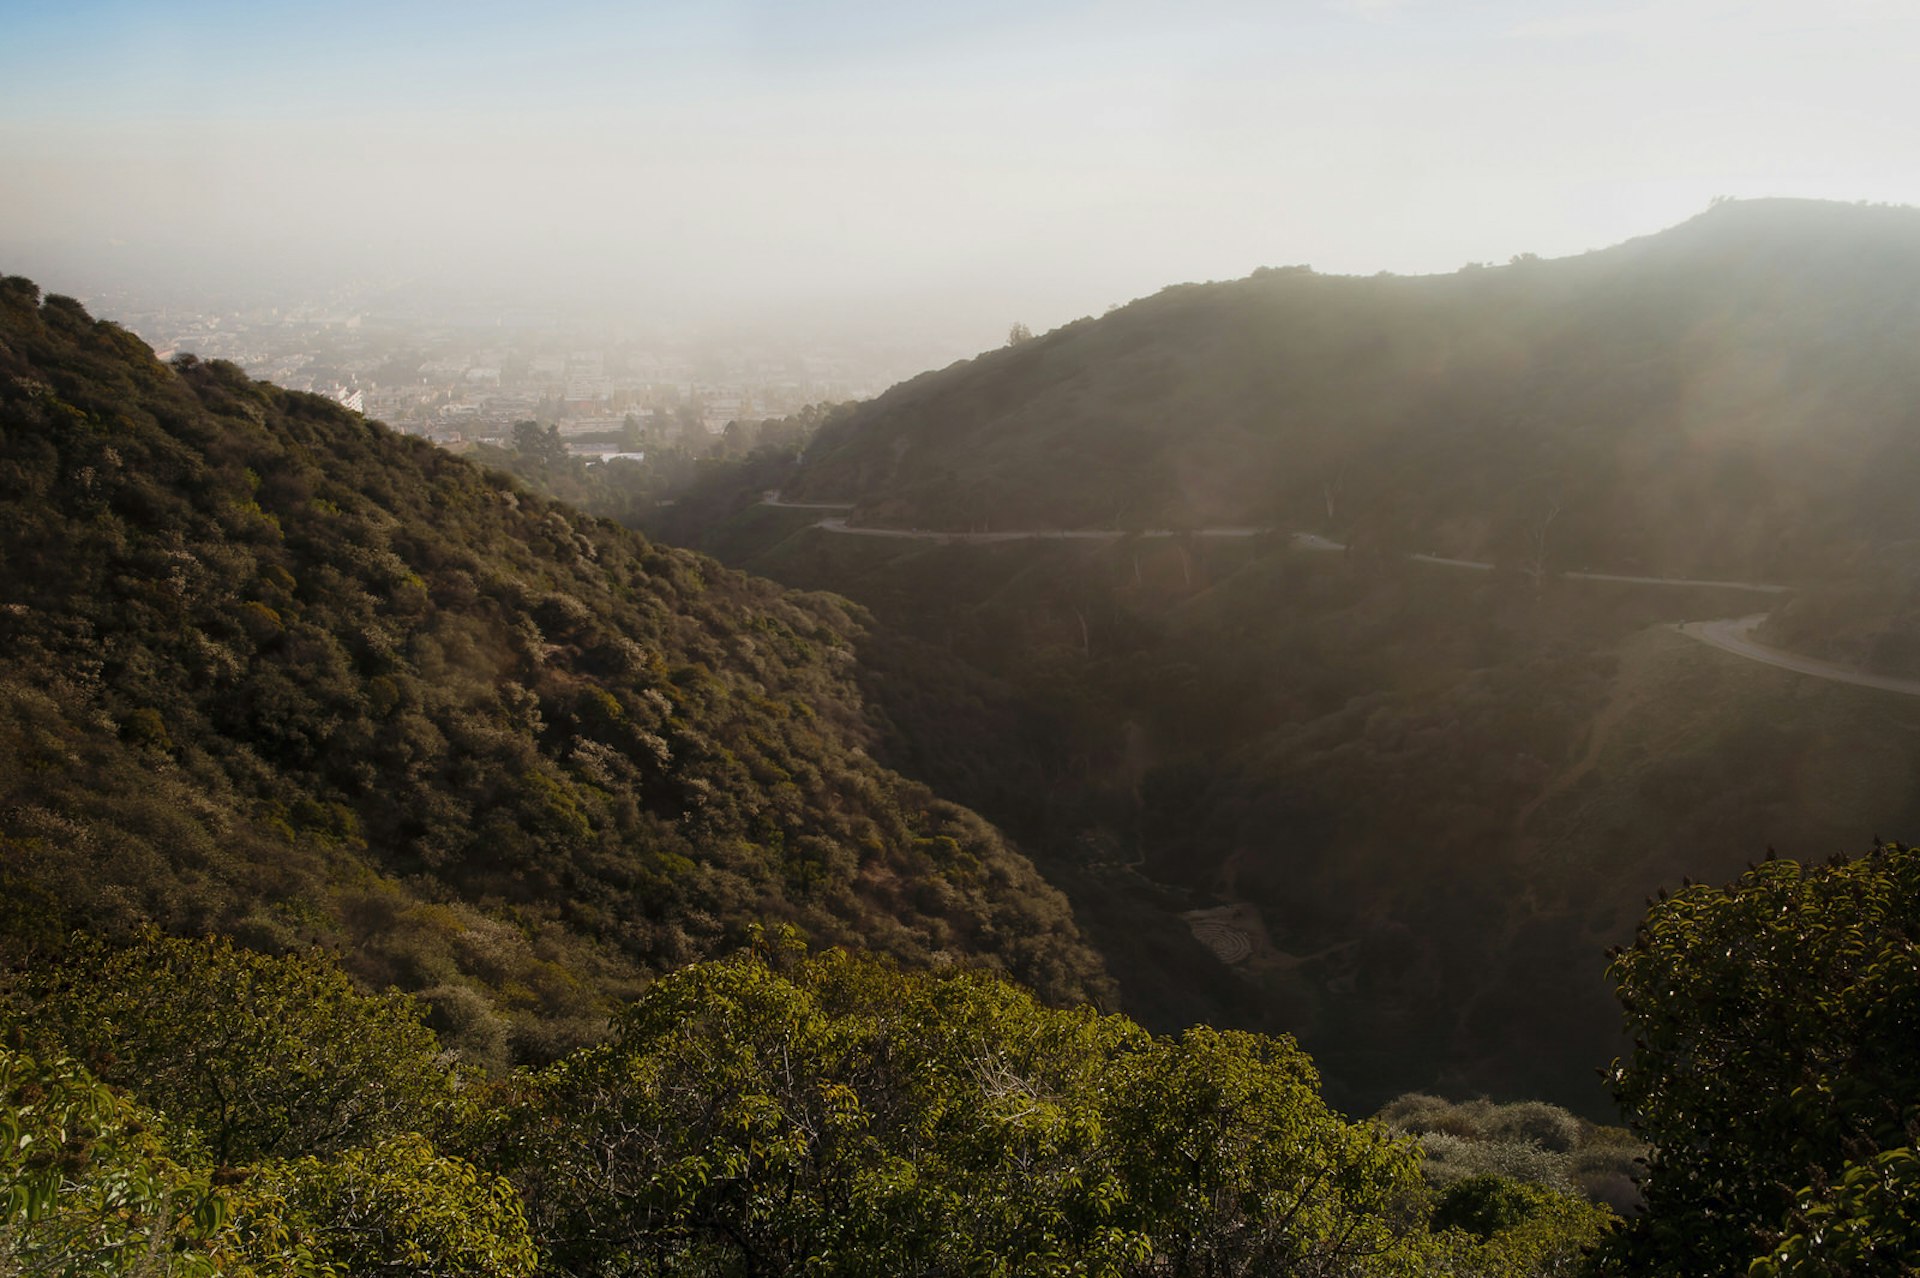 Aerial view of a rural mountain road in Runyon Canyon near Los Angeles